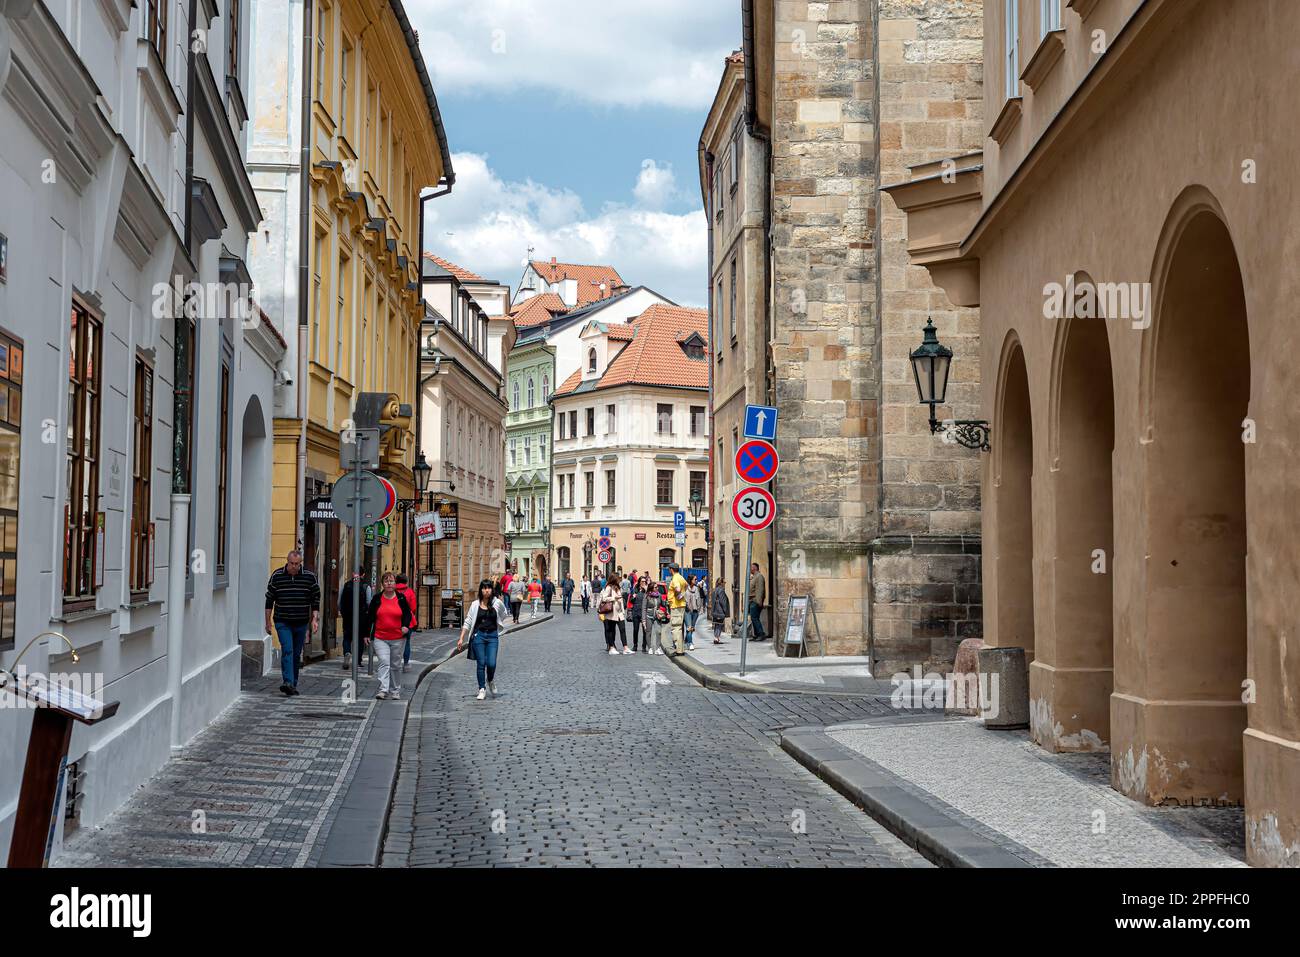 Prague, Czech Republic - May 10, 2022: People on the streets of Prague Old Town Stock Photo